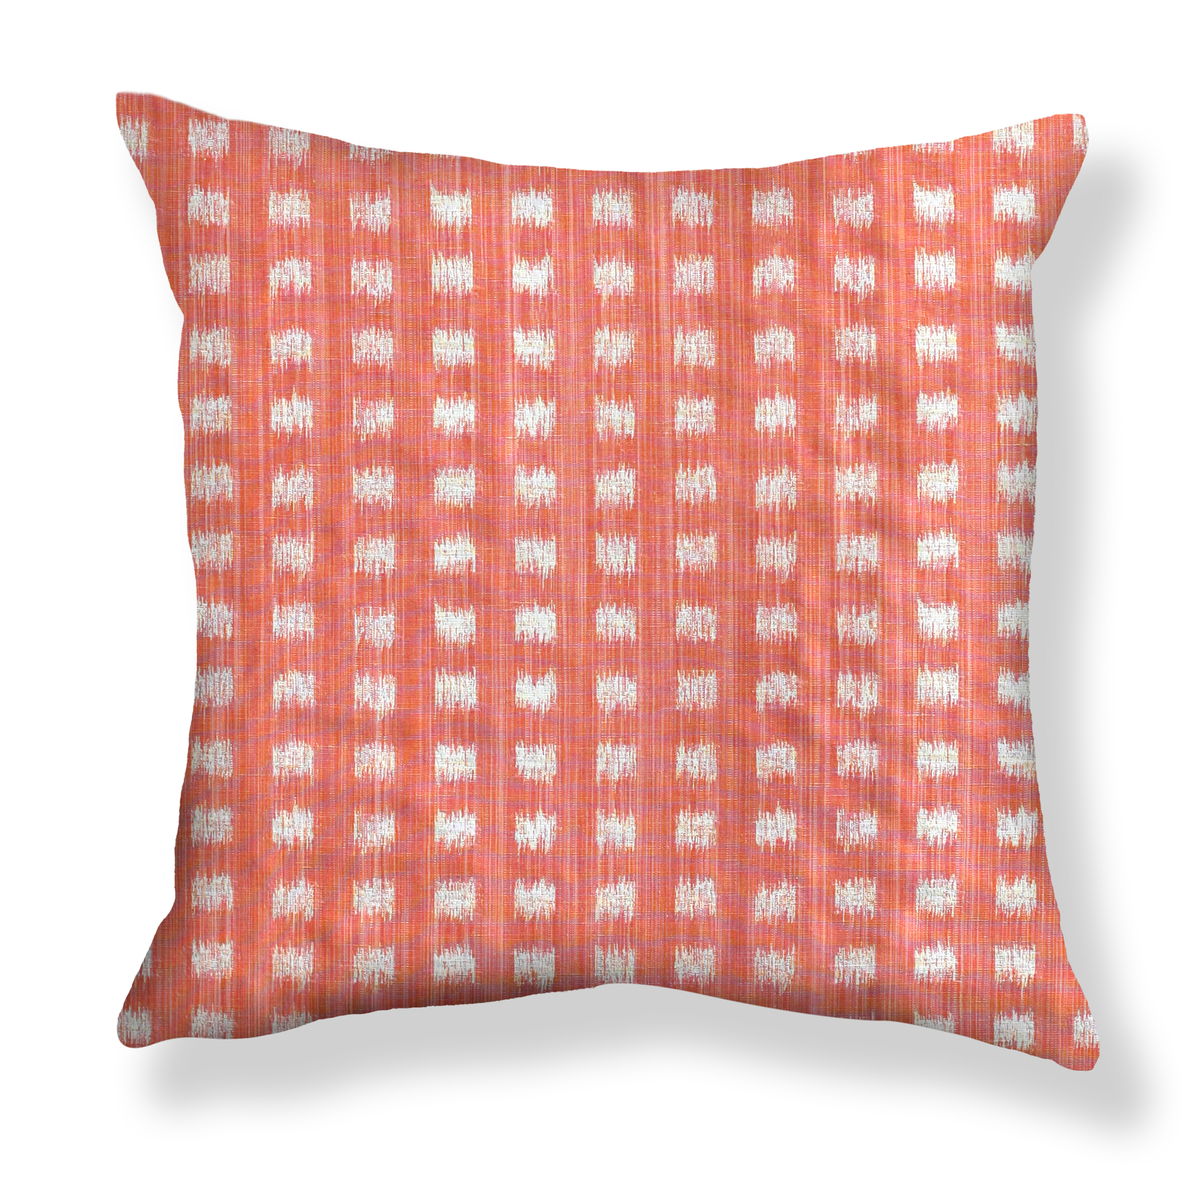 Gridded Ikat Pillow in Coral